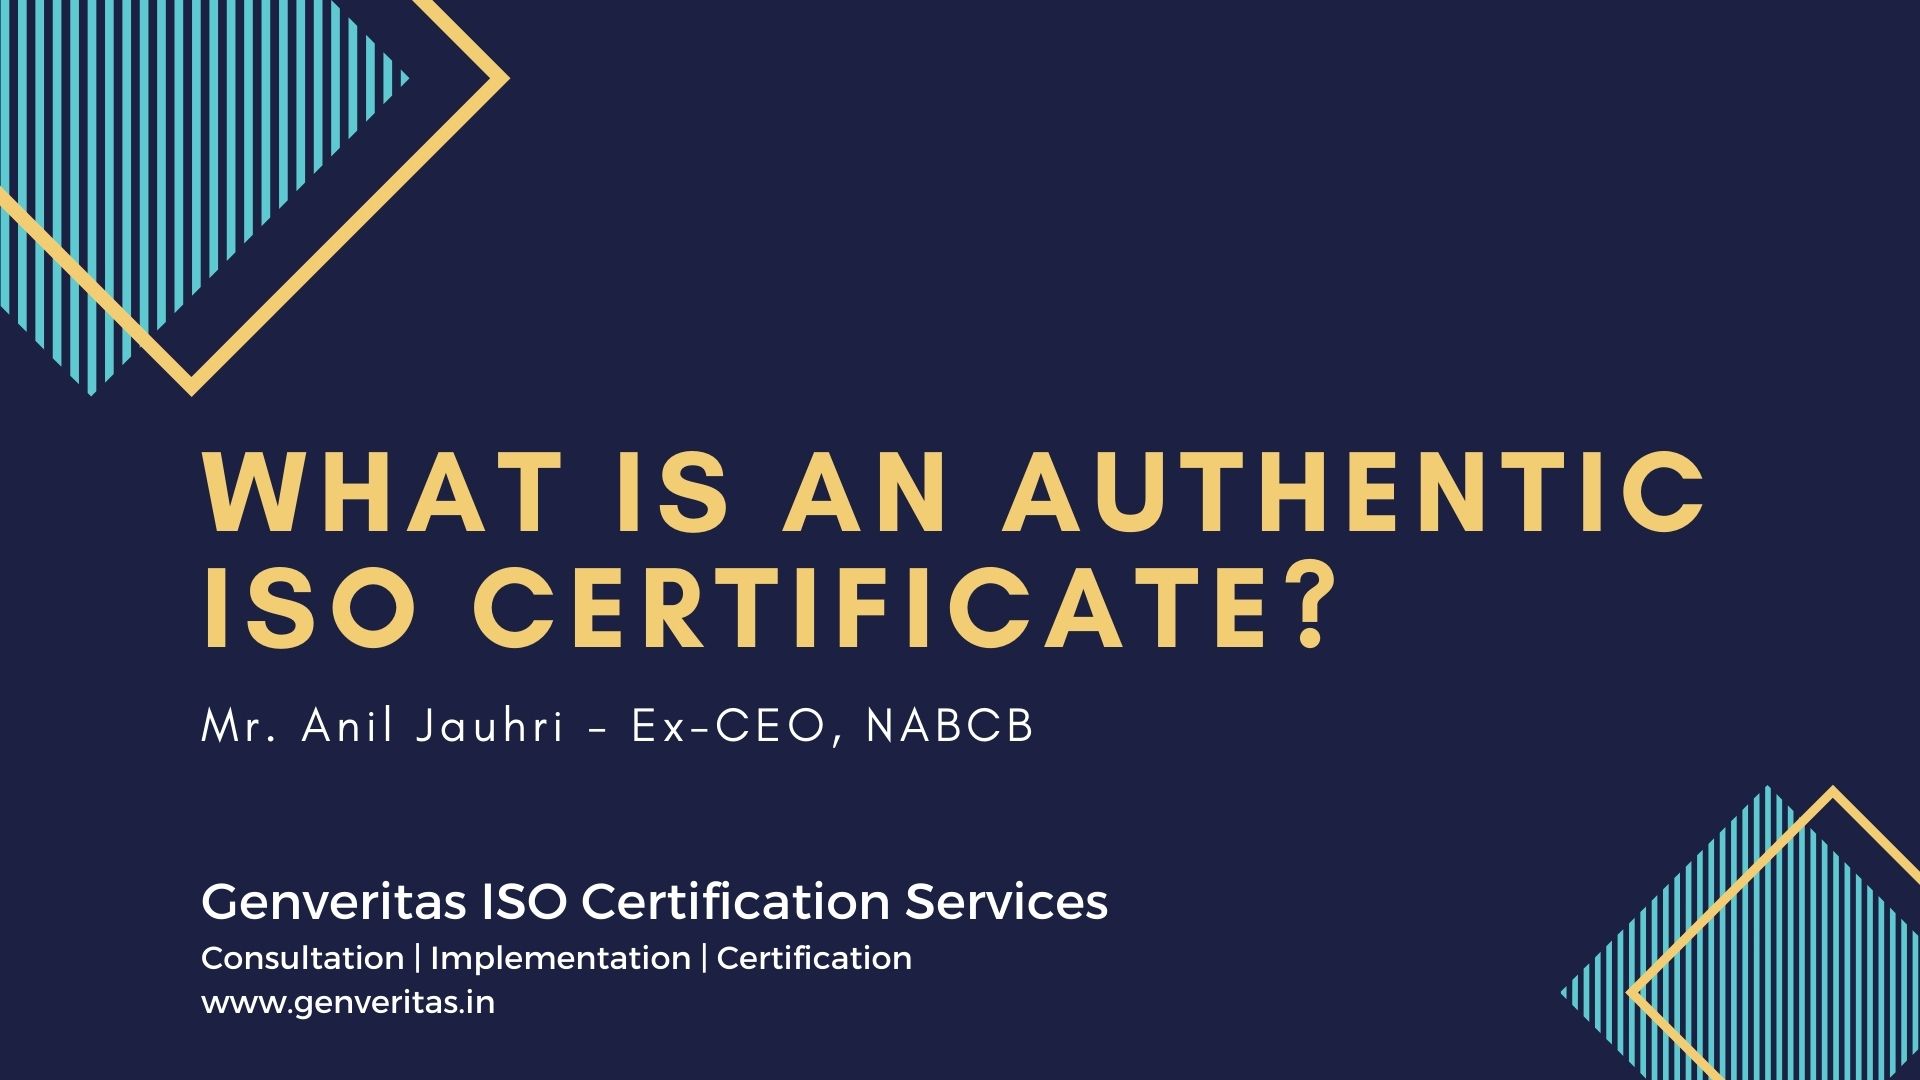 What is an Authentic ISO Certificate?